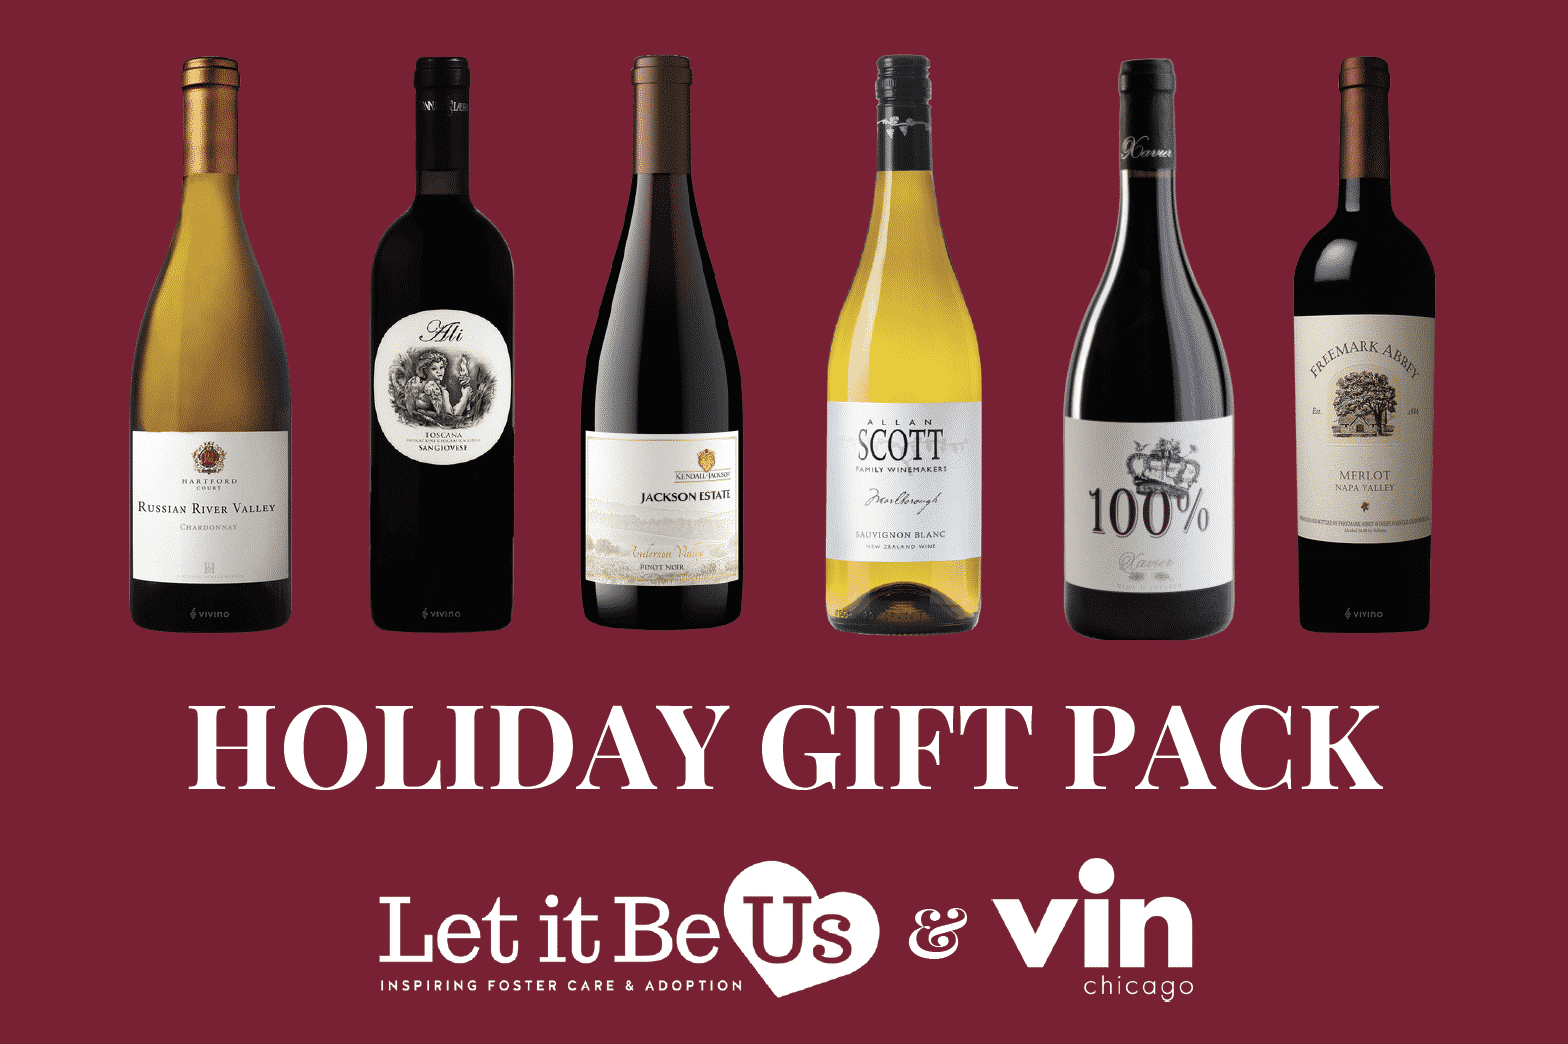 Holiday Wine Pack from Vin Chicago